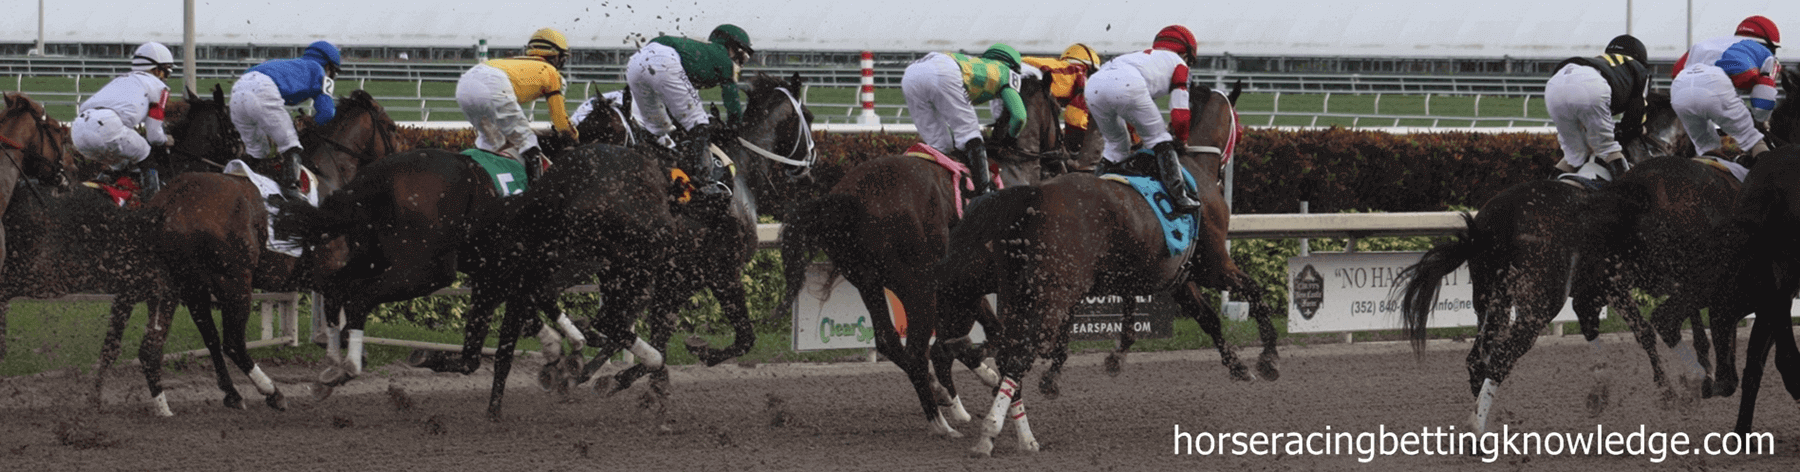 Horse Racing Betting Knowledge